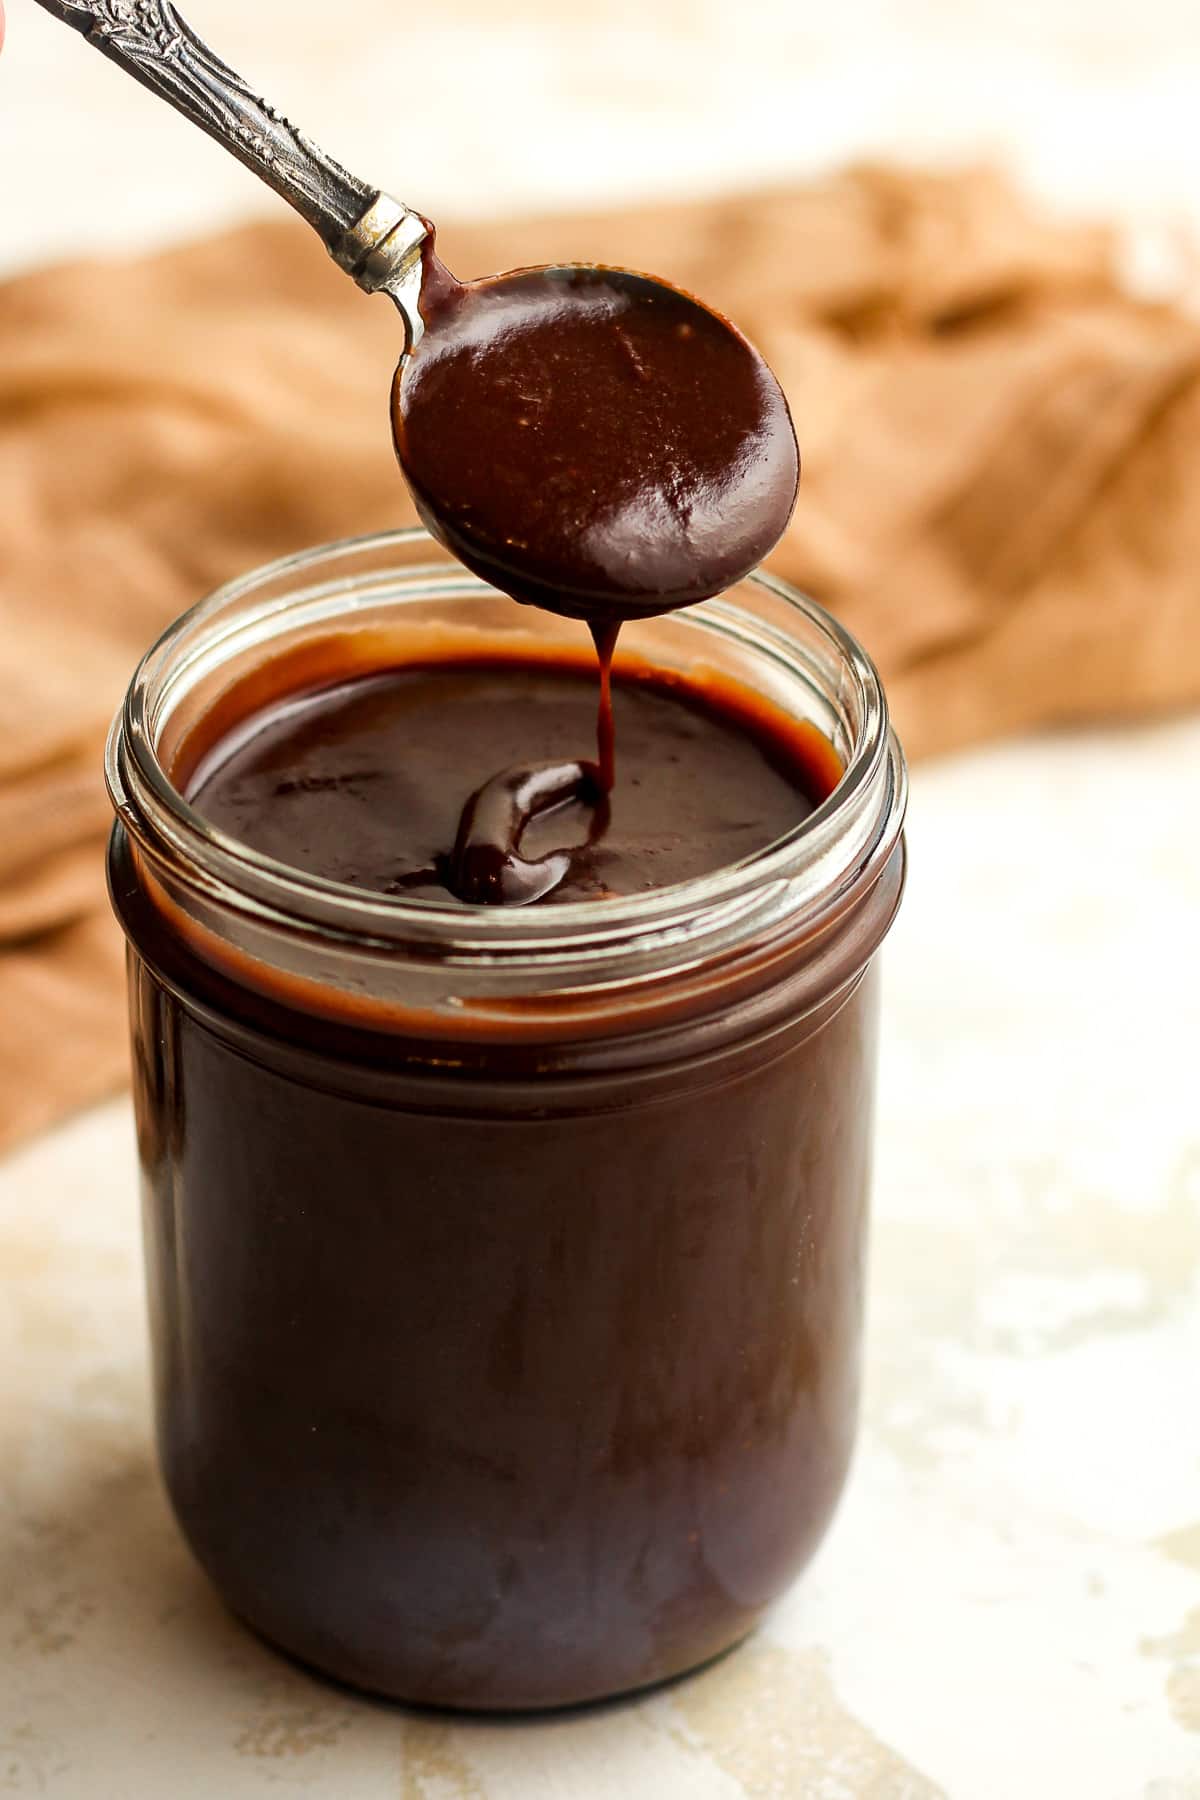 Side view of a jar of hot fudge sauce.